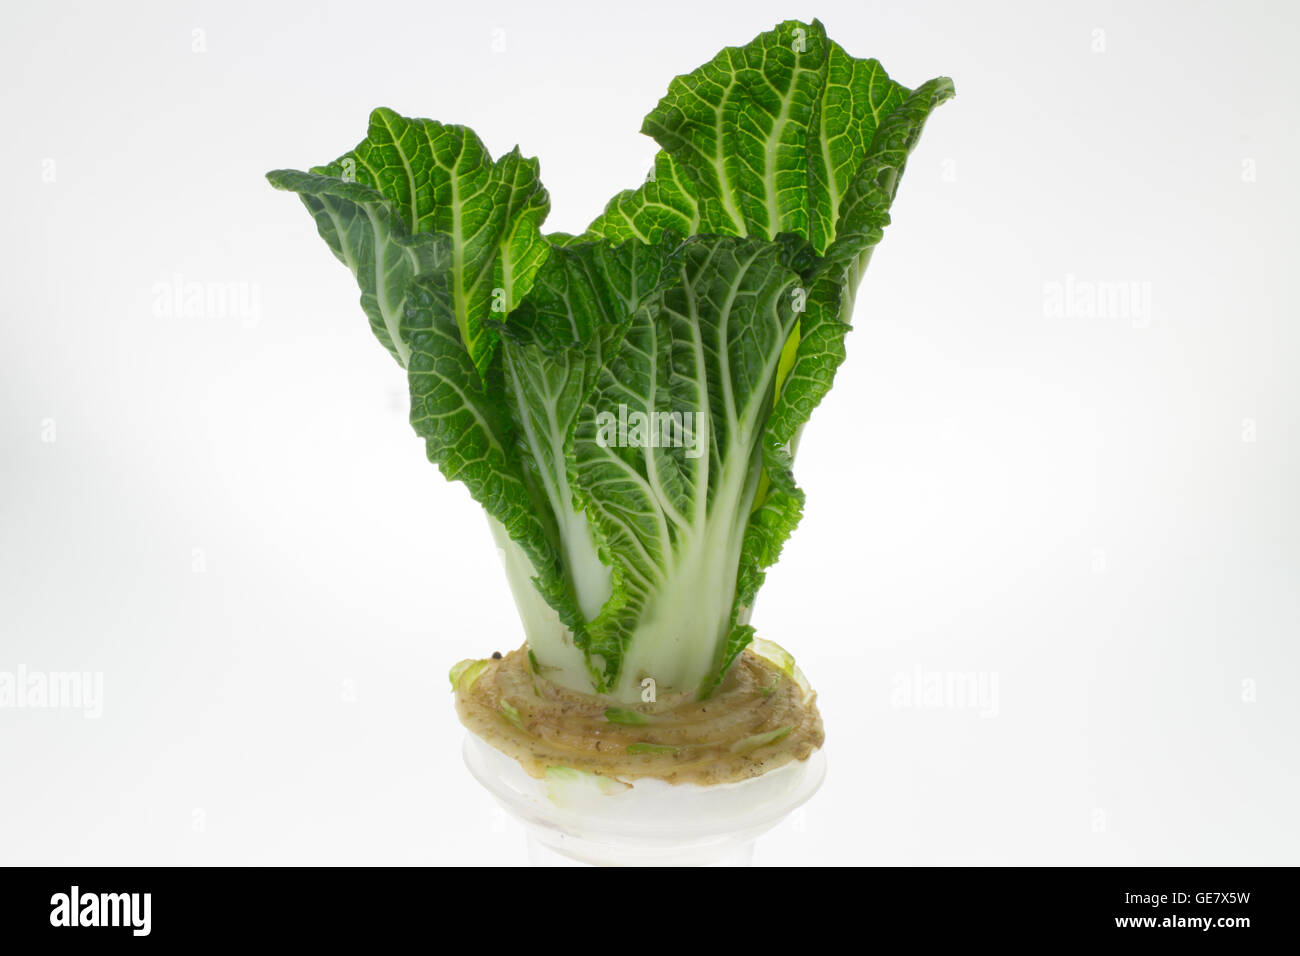 Chinese cabbage grown in glass, placed on the table. Stock Photo